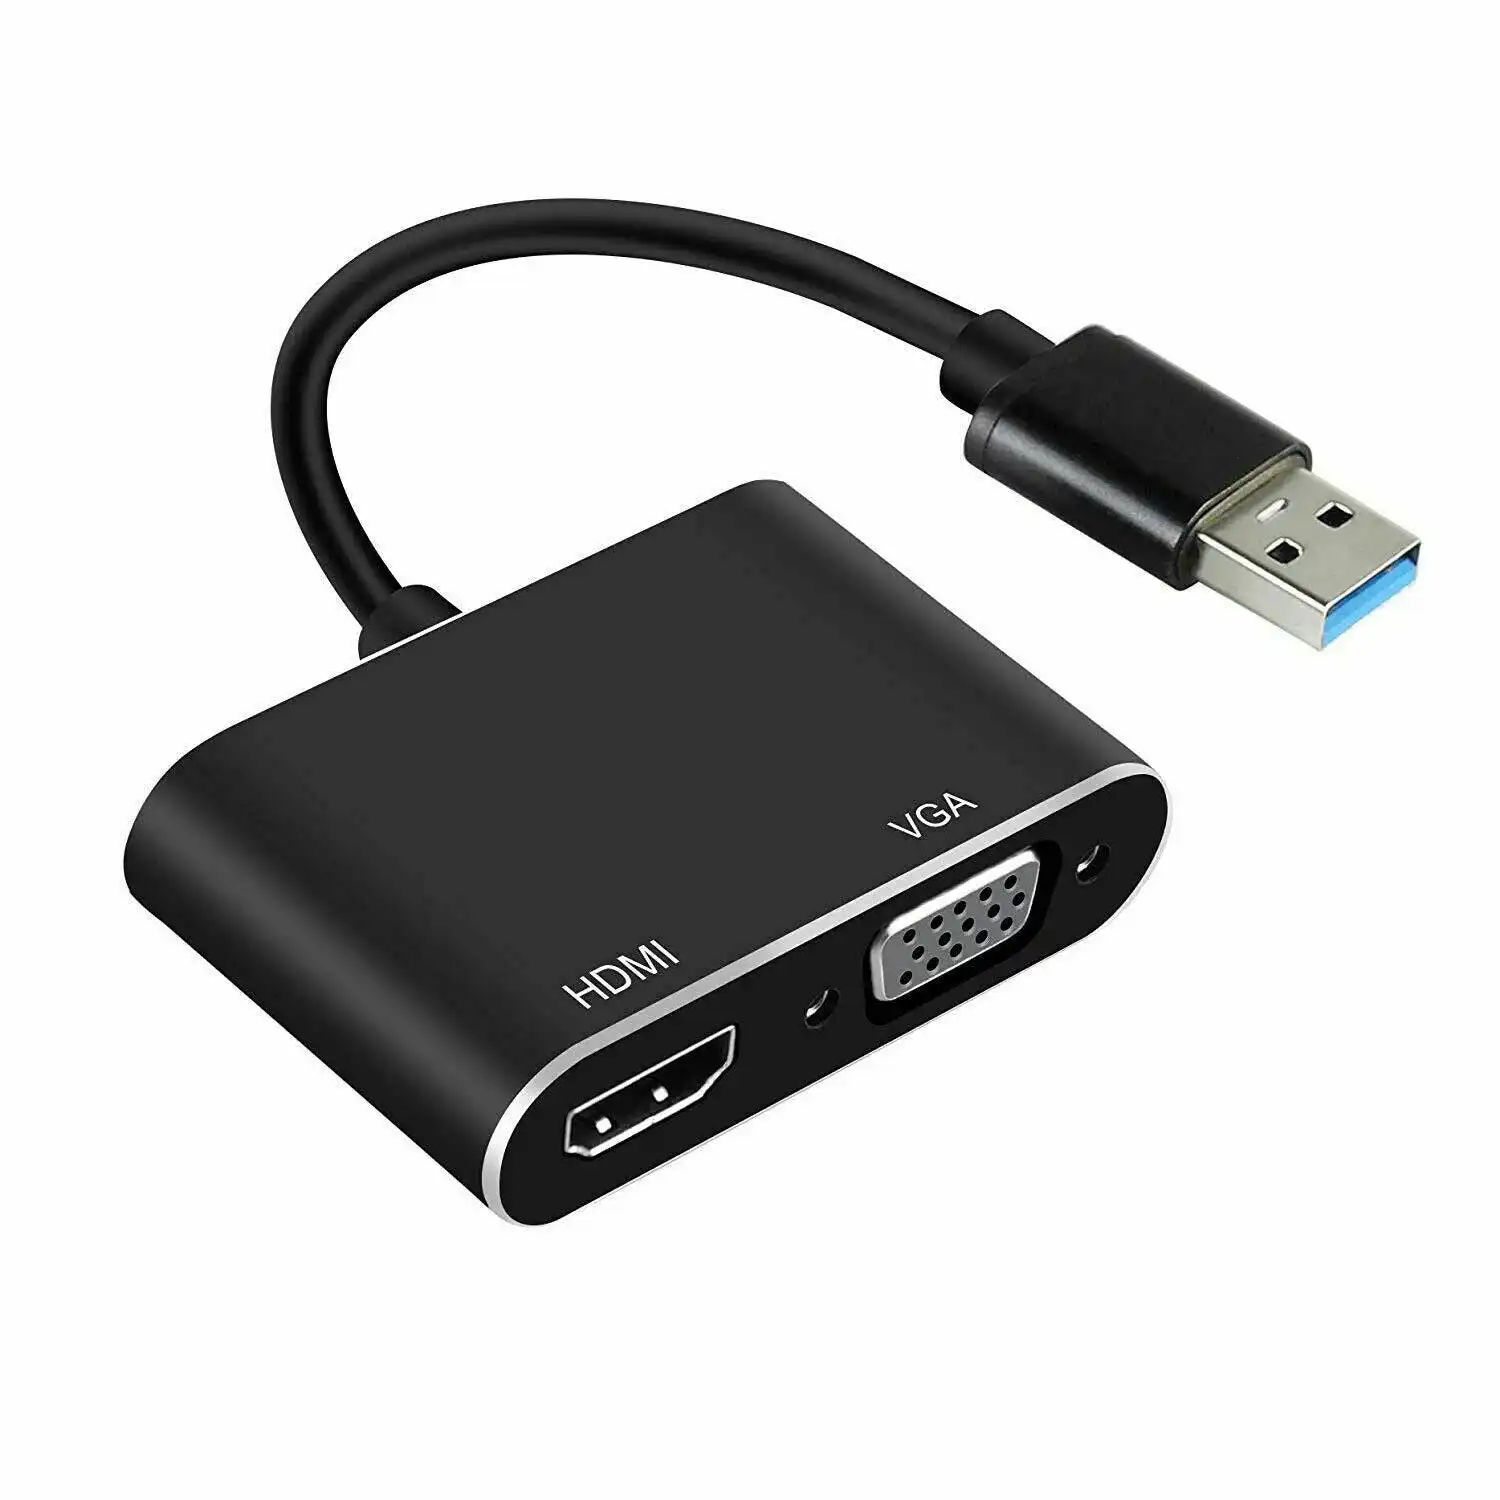 USB 3.0 to HDMI + VGA Full HD 1080p Video Adapter Cable Converter for PC